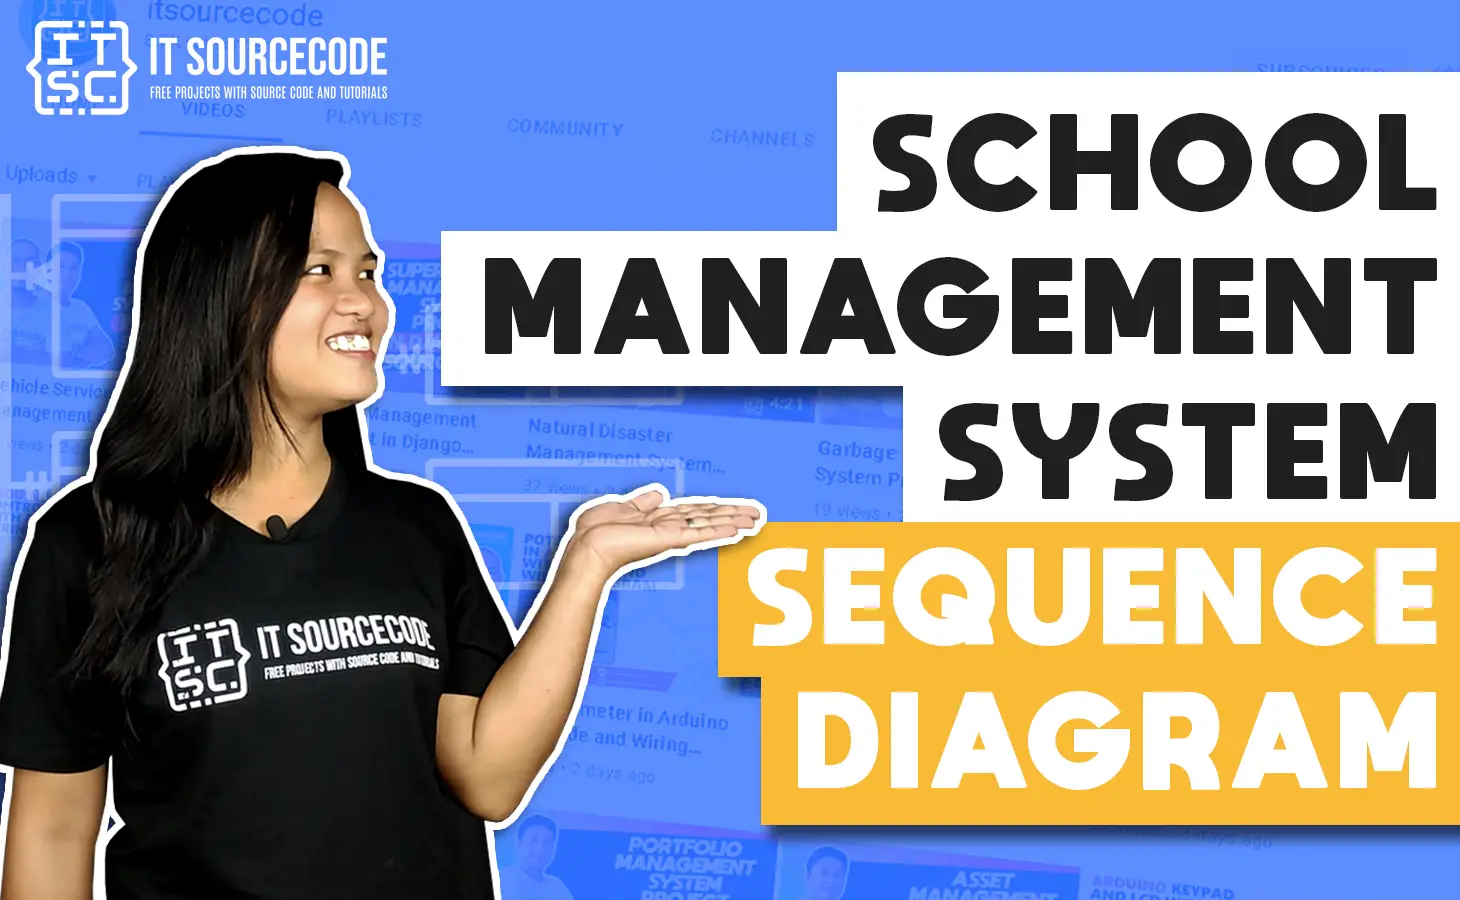 Sequence Diagram for School Management System